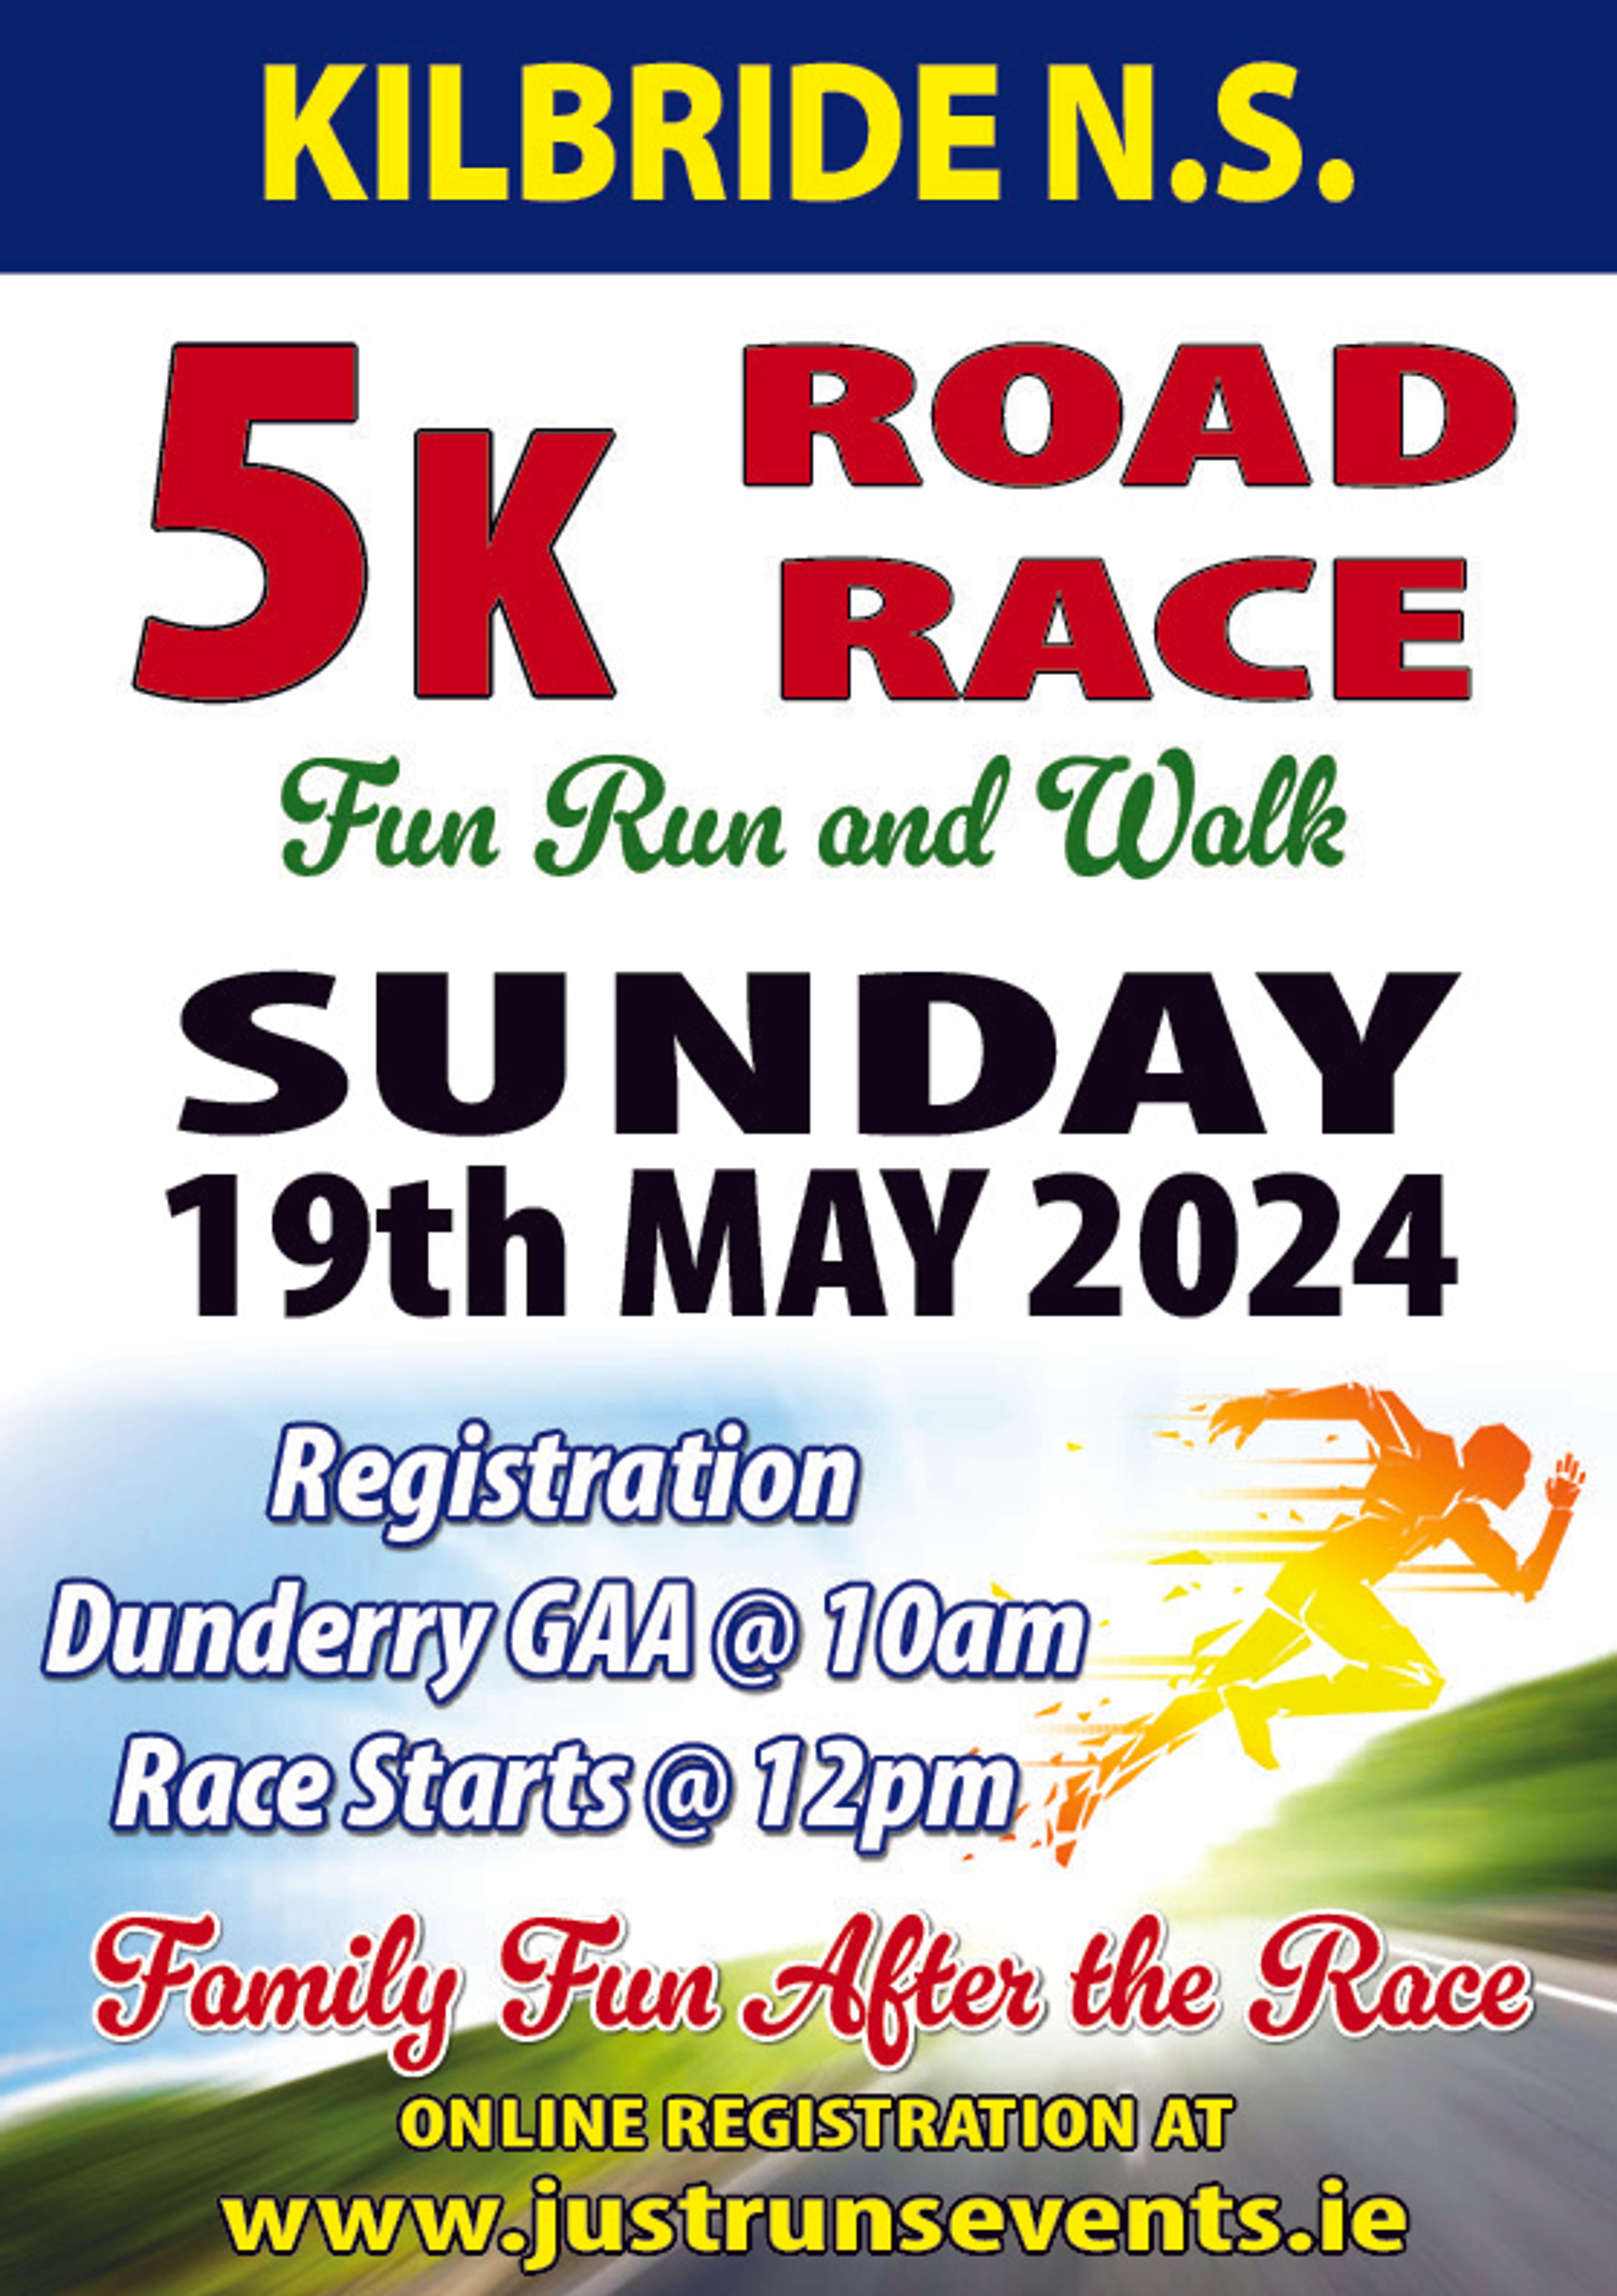 Featured Event - Kilbride N. S 5K